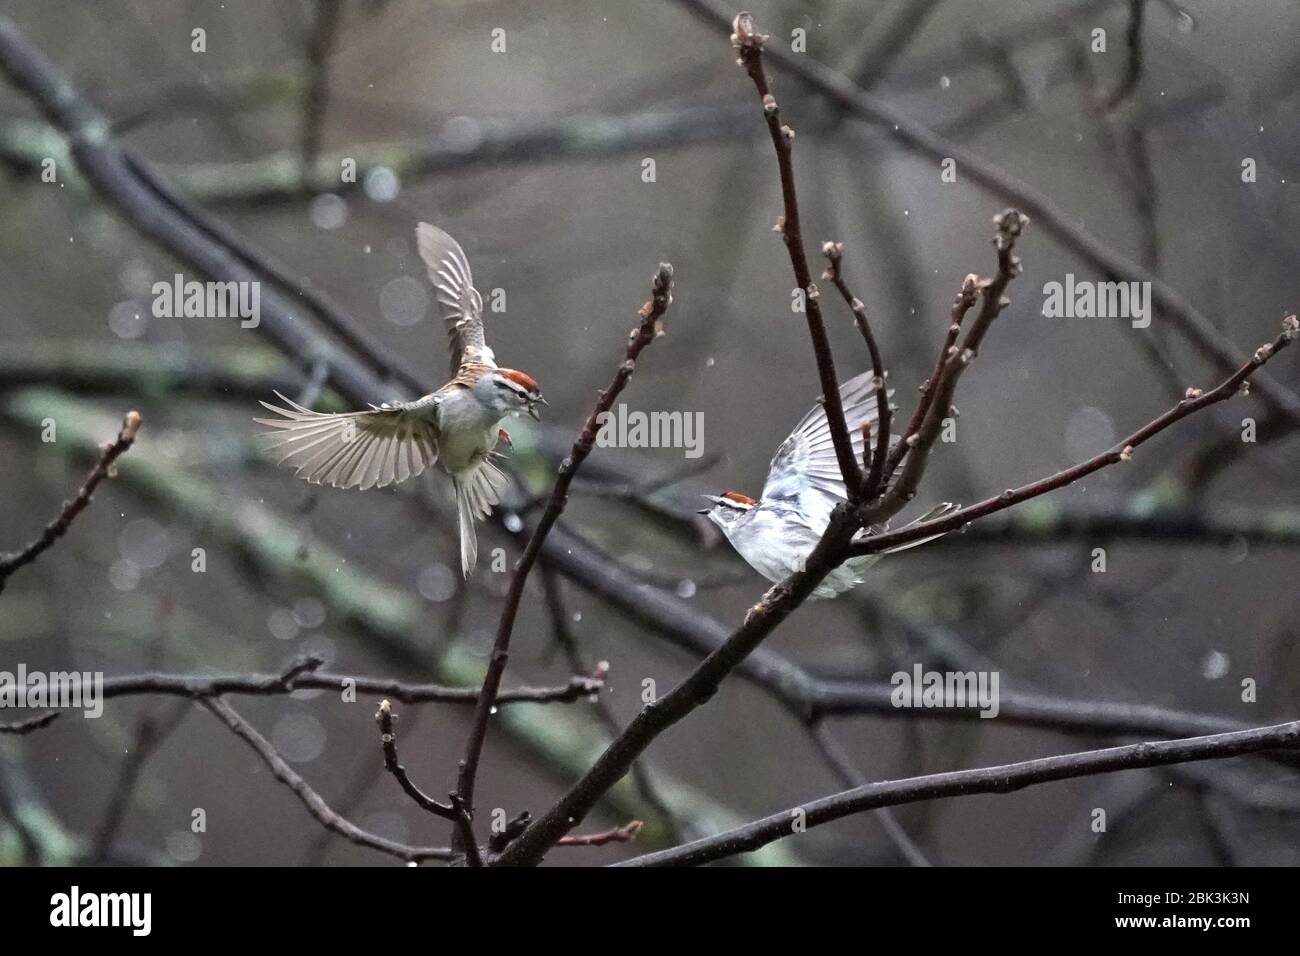 Chipping Sparrows fighting in midair Stock Photo